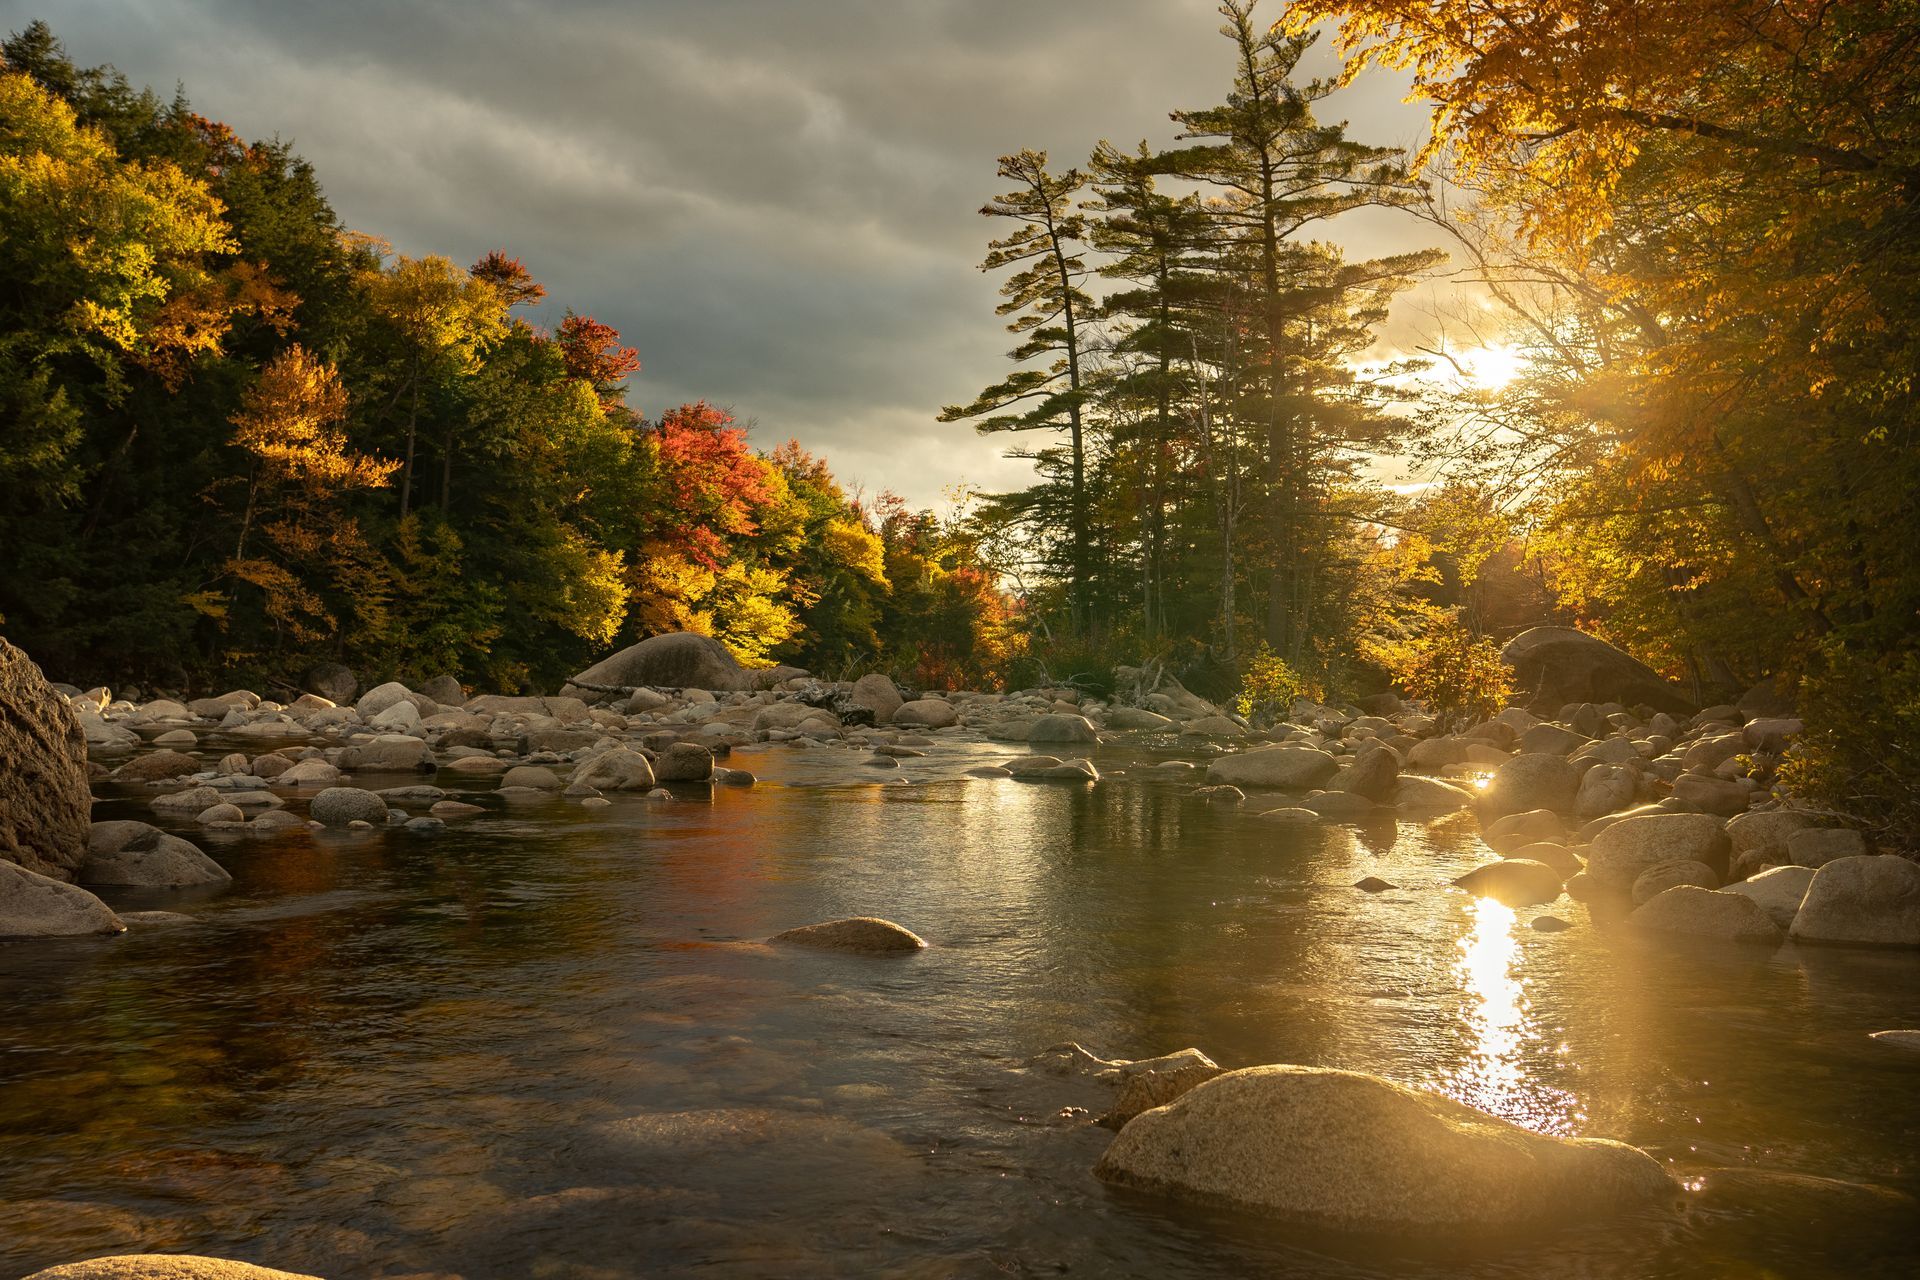 a river surrounded by trees and rocks with the sun shining through the trees